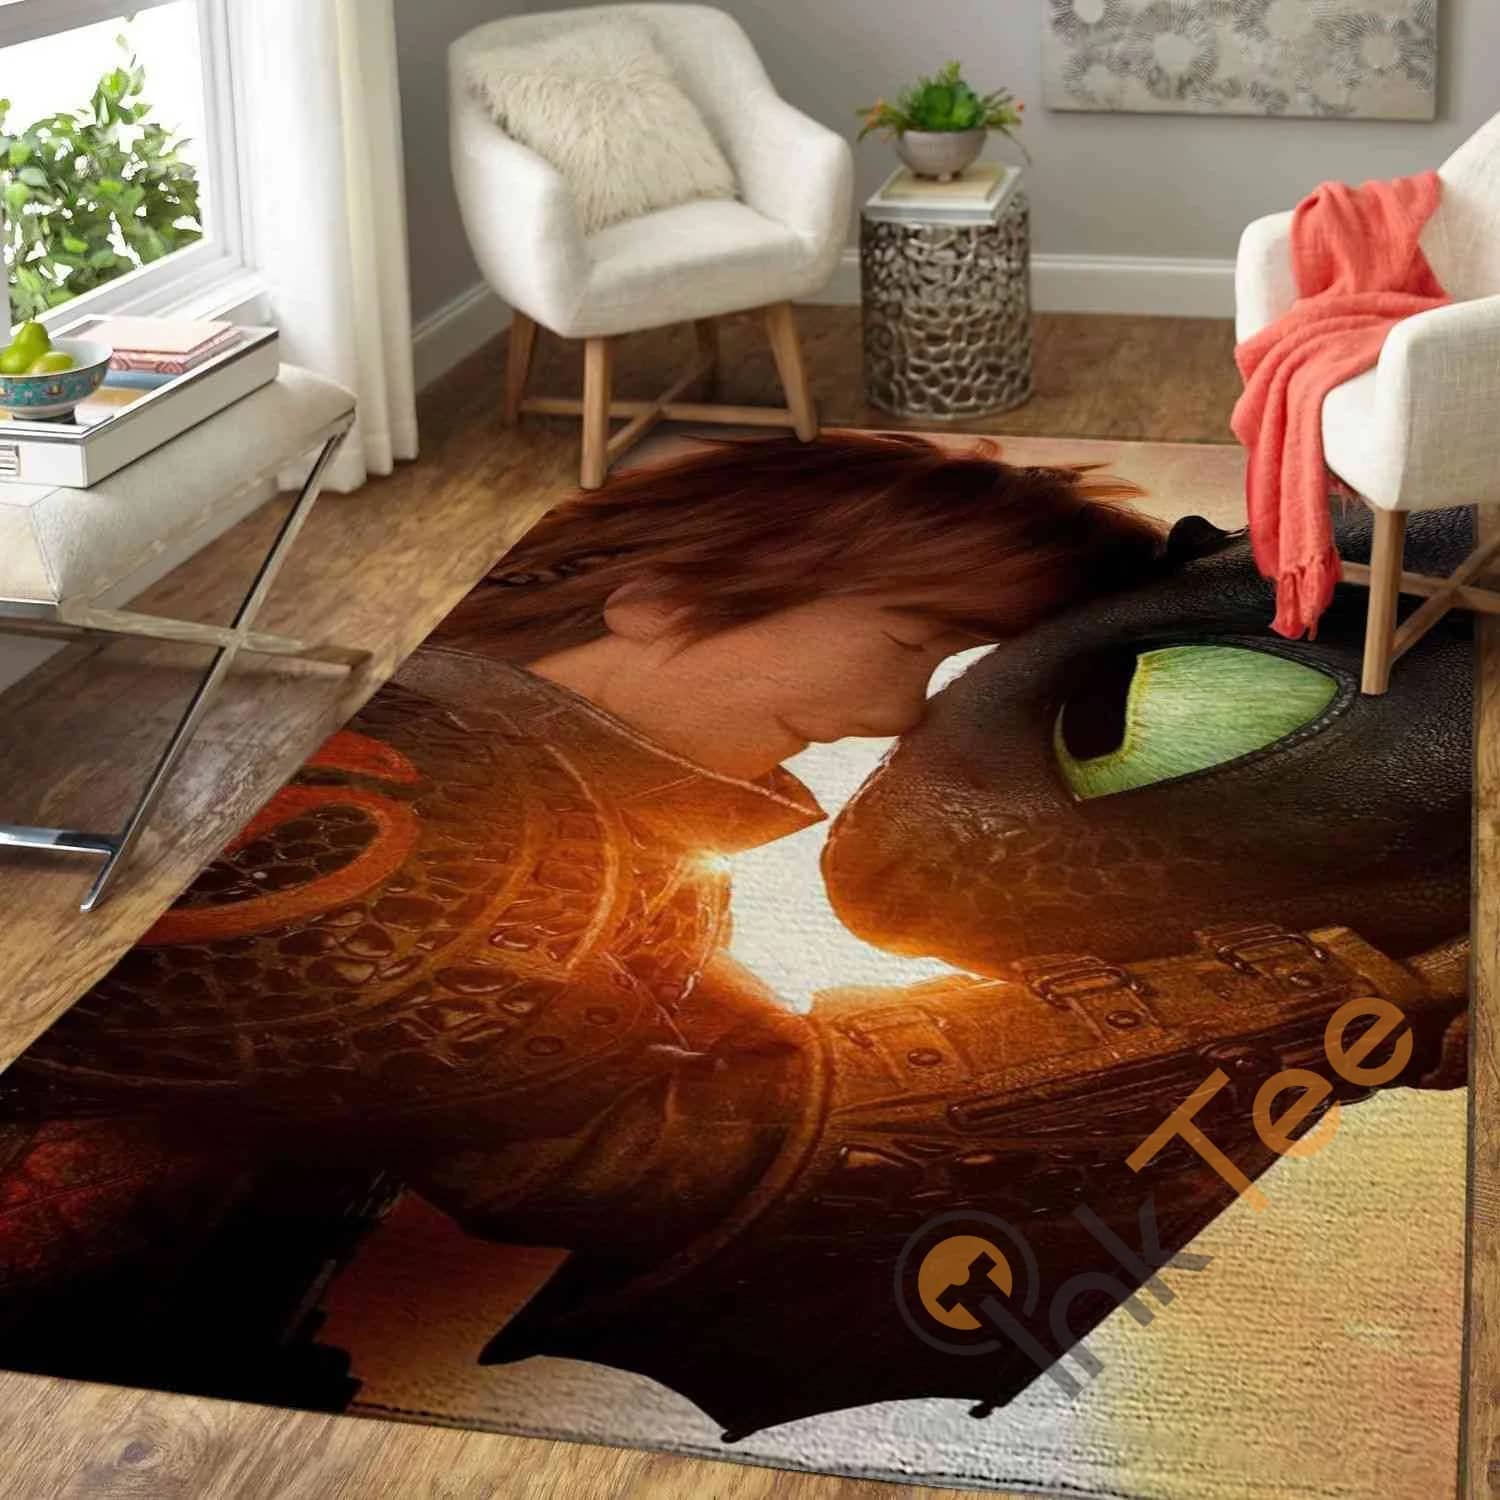 How To Train Your Dragon Area  Amazon Best Seller Sku 2242 Rug